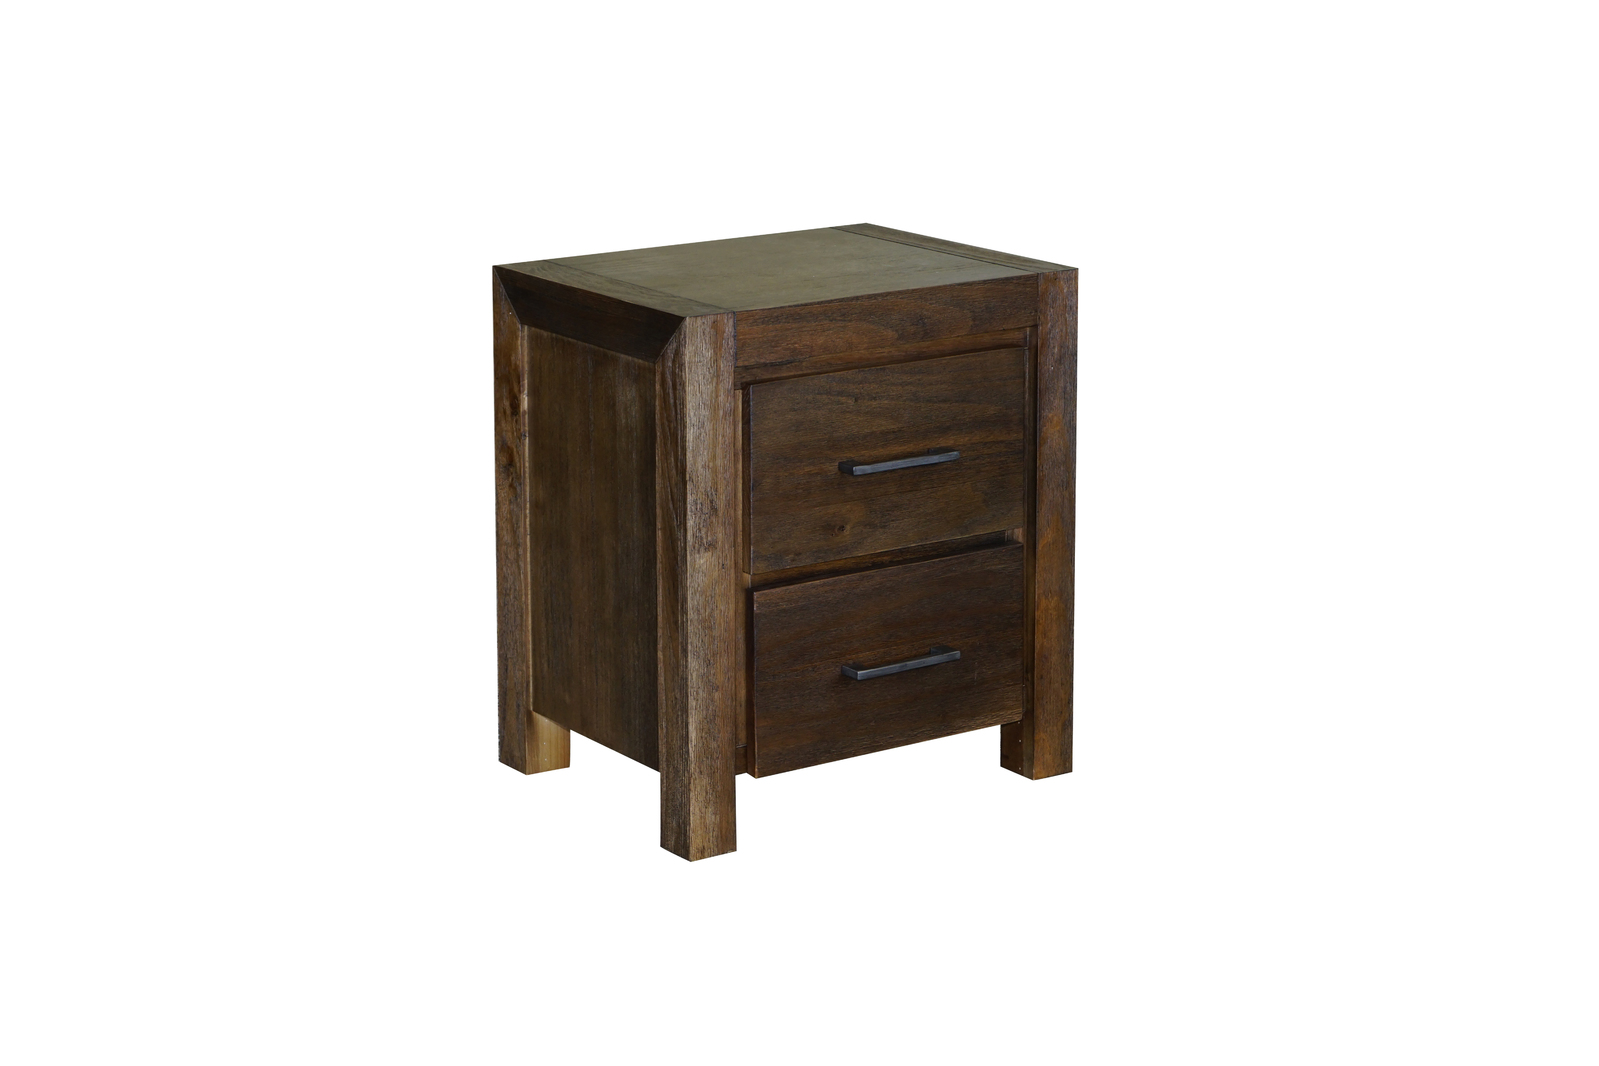 Homefurn Bedside Table 2 Drawer Chest of Drawers Timber 580 x 425 x 600H Brandon 5516 BBT